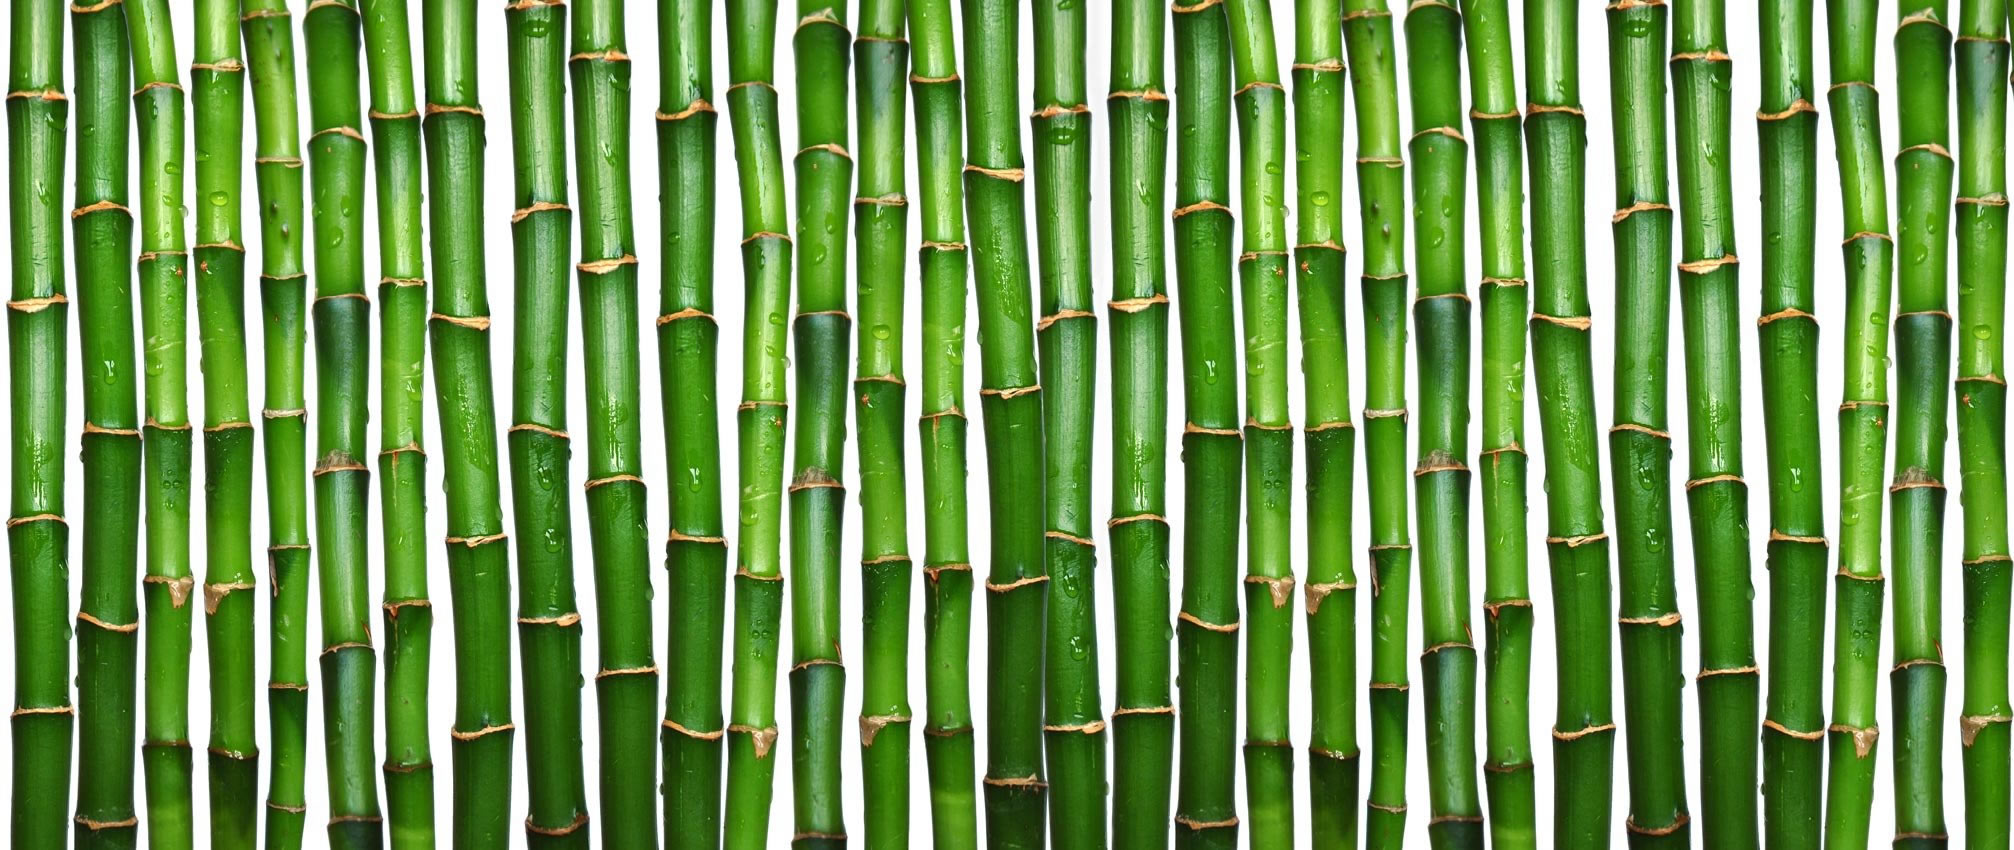 Bamboo Wallpapers High Quality | Download Free